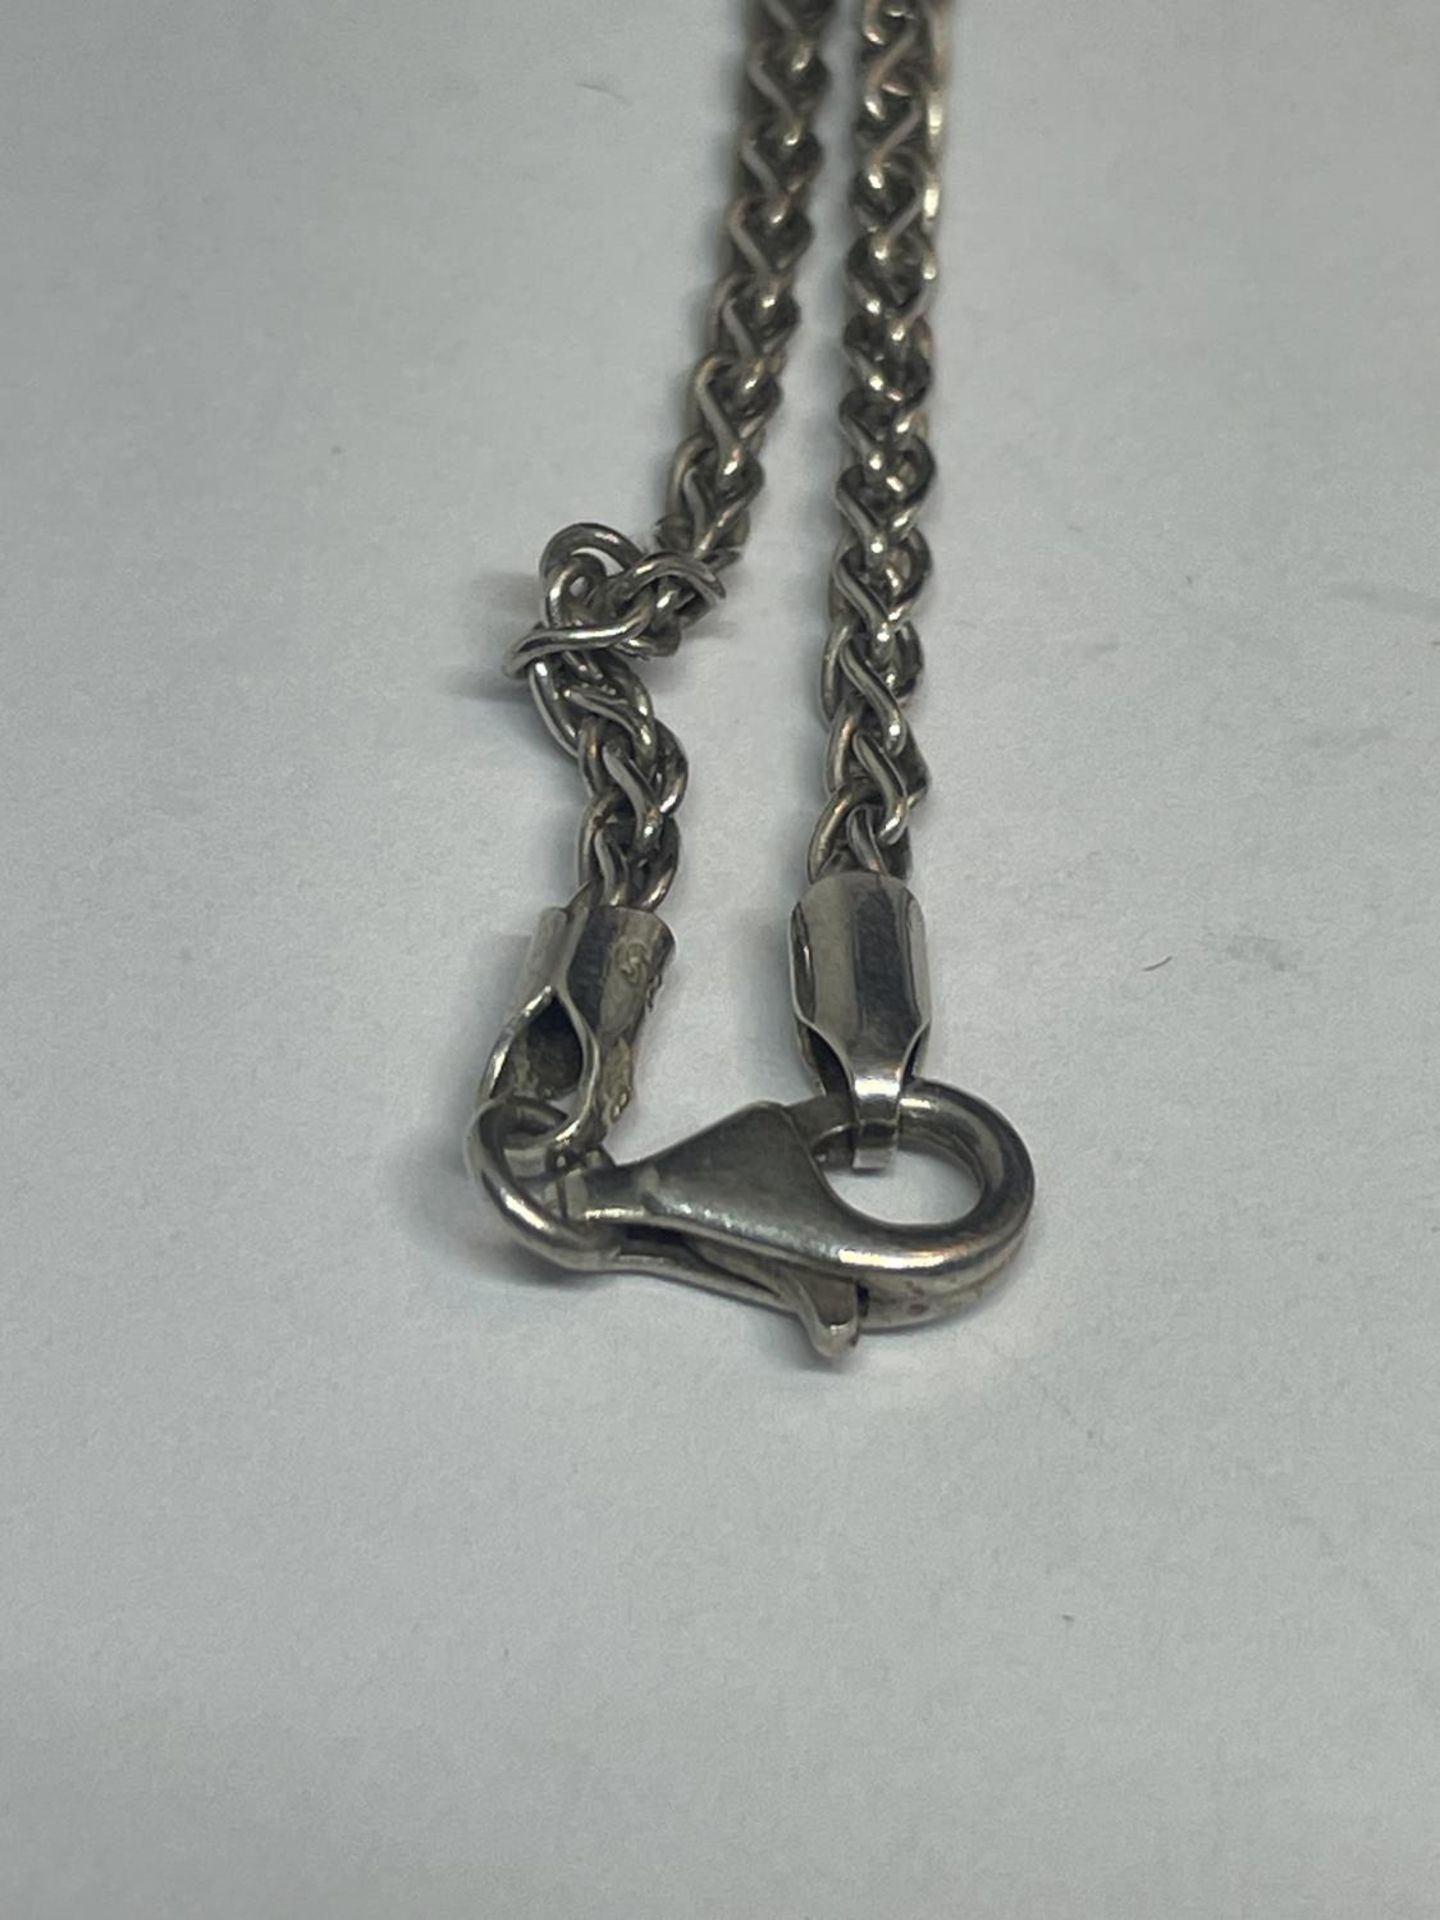 A SILVER NECKLACE WITH TRUMPET PENDANT IN A PRESENTATION BOX - Image 3 of 3